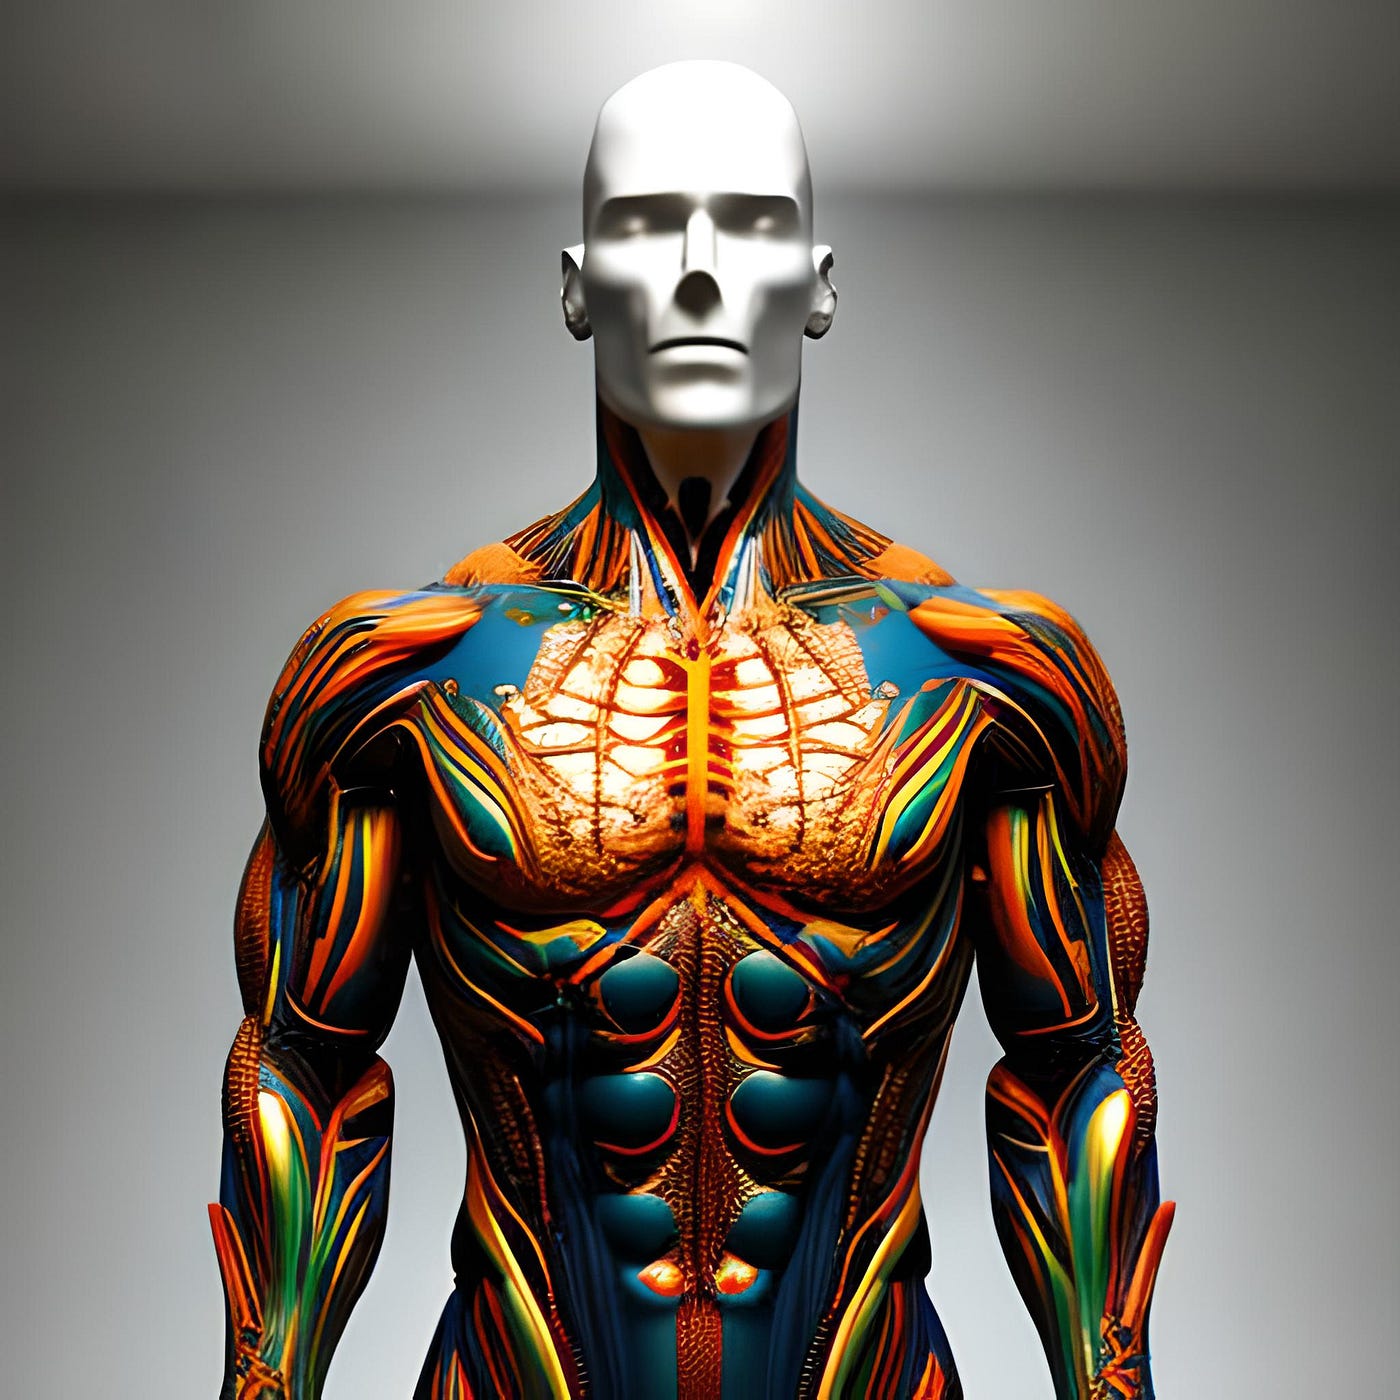 How to Get Fit Using Electrical Muscle Stimulation (EMS